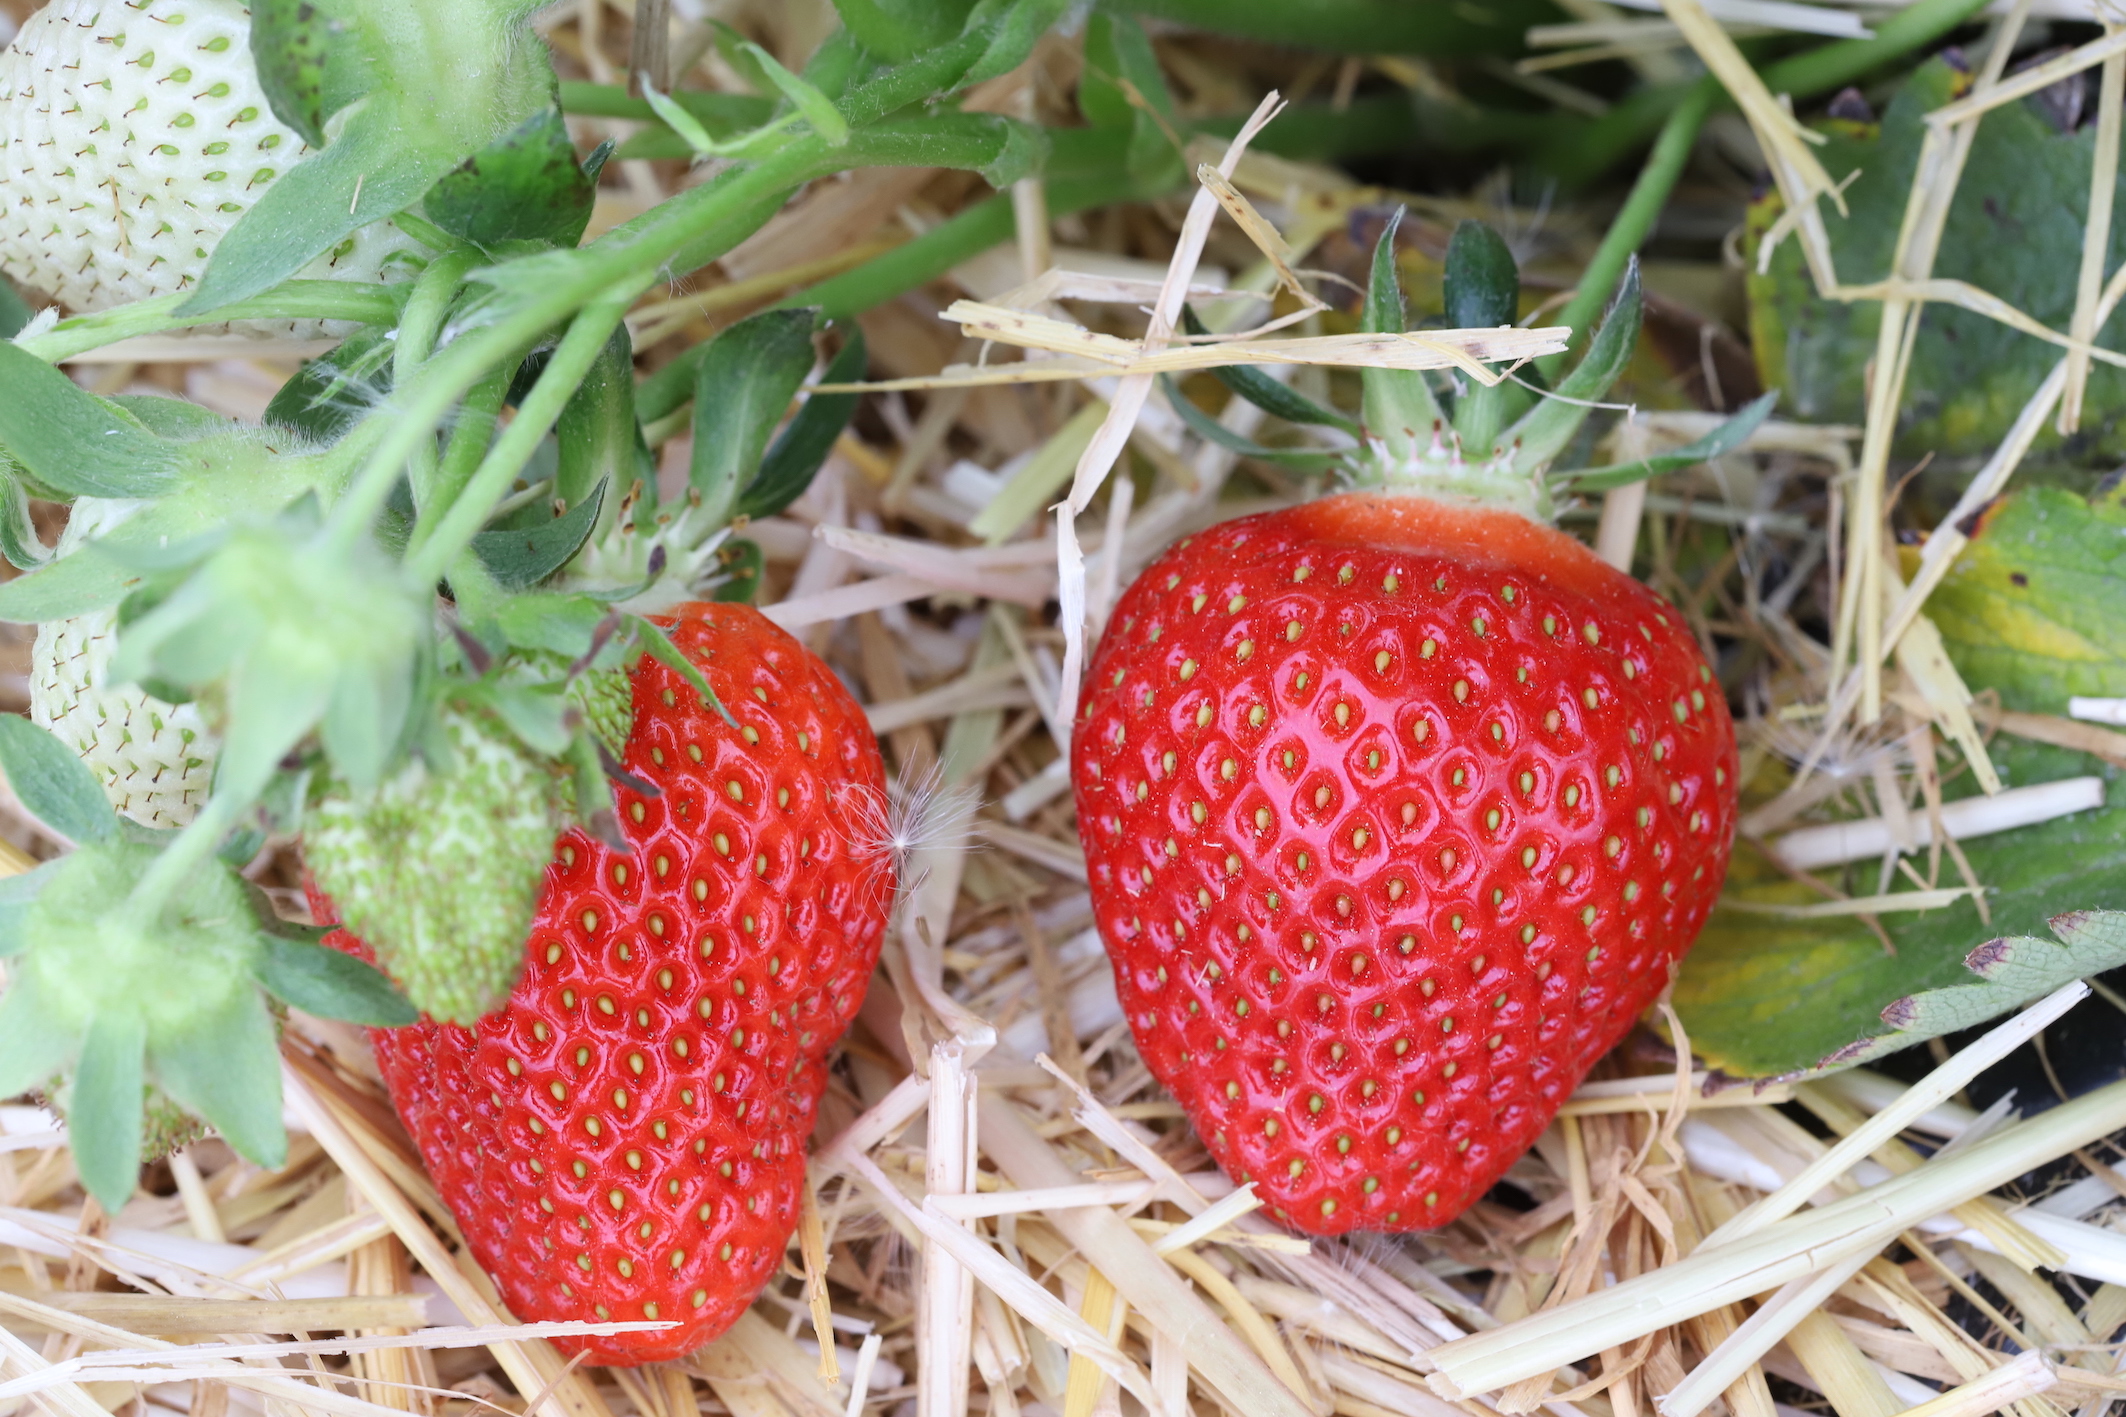 Factors of variation in the taste and nutritional quality of strawberries